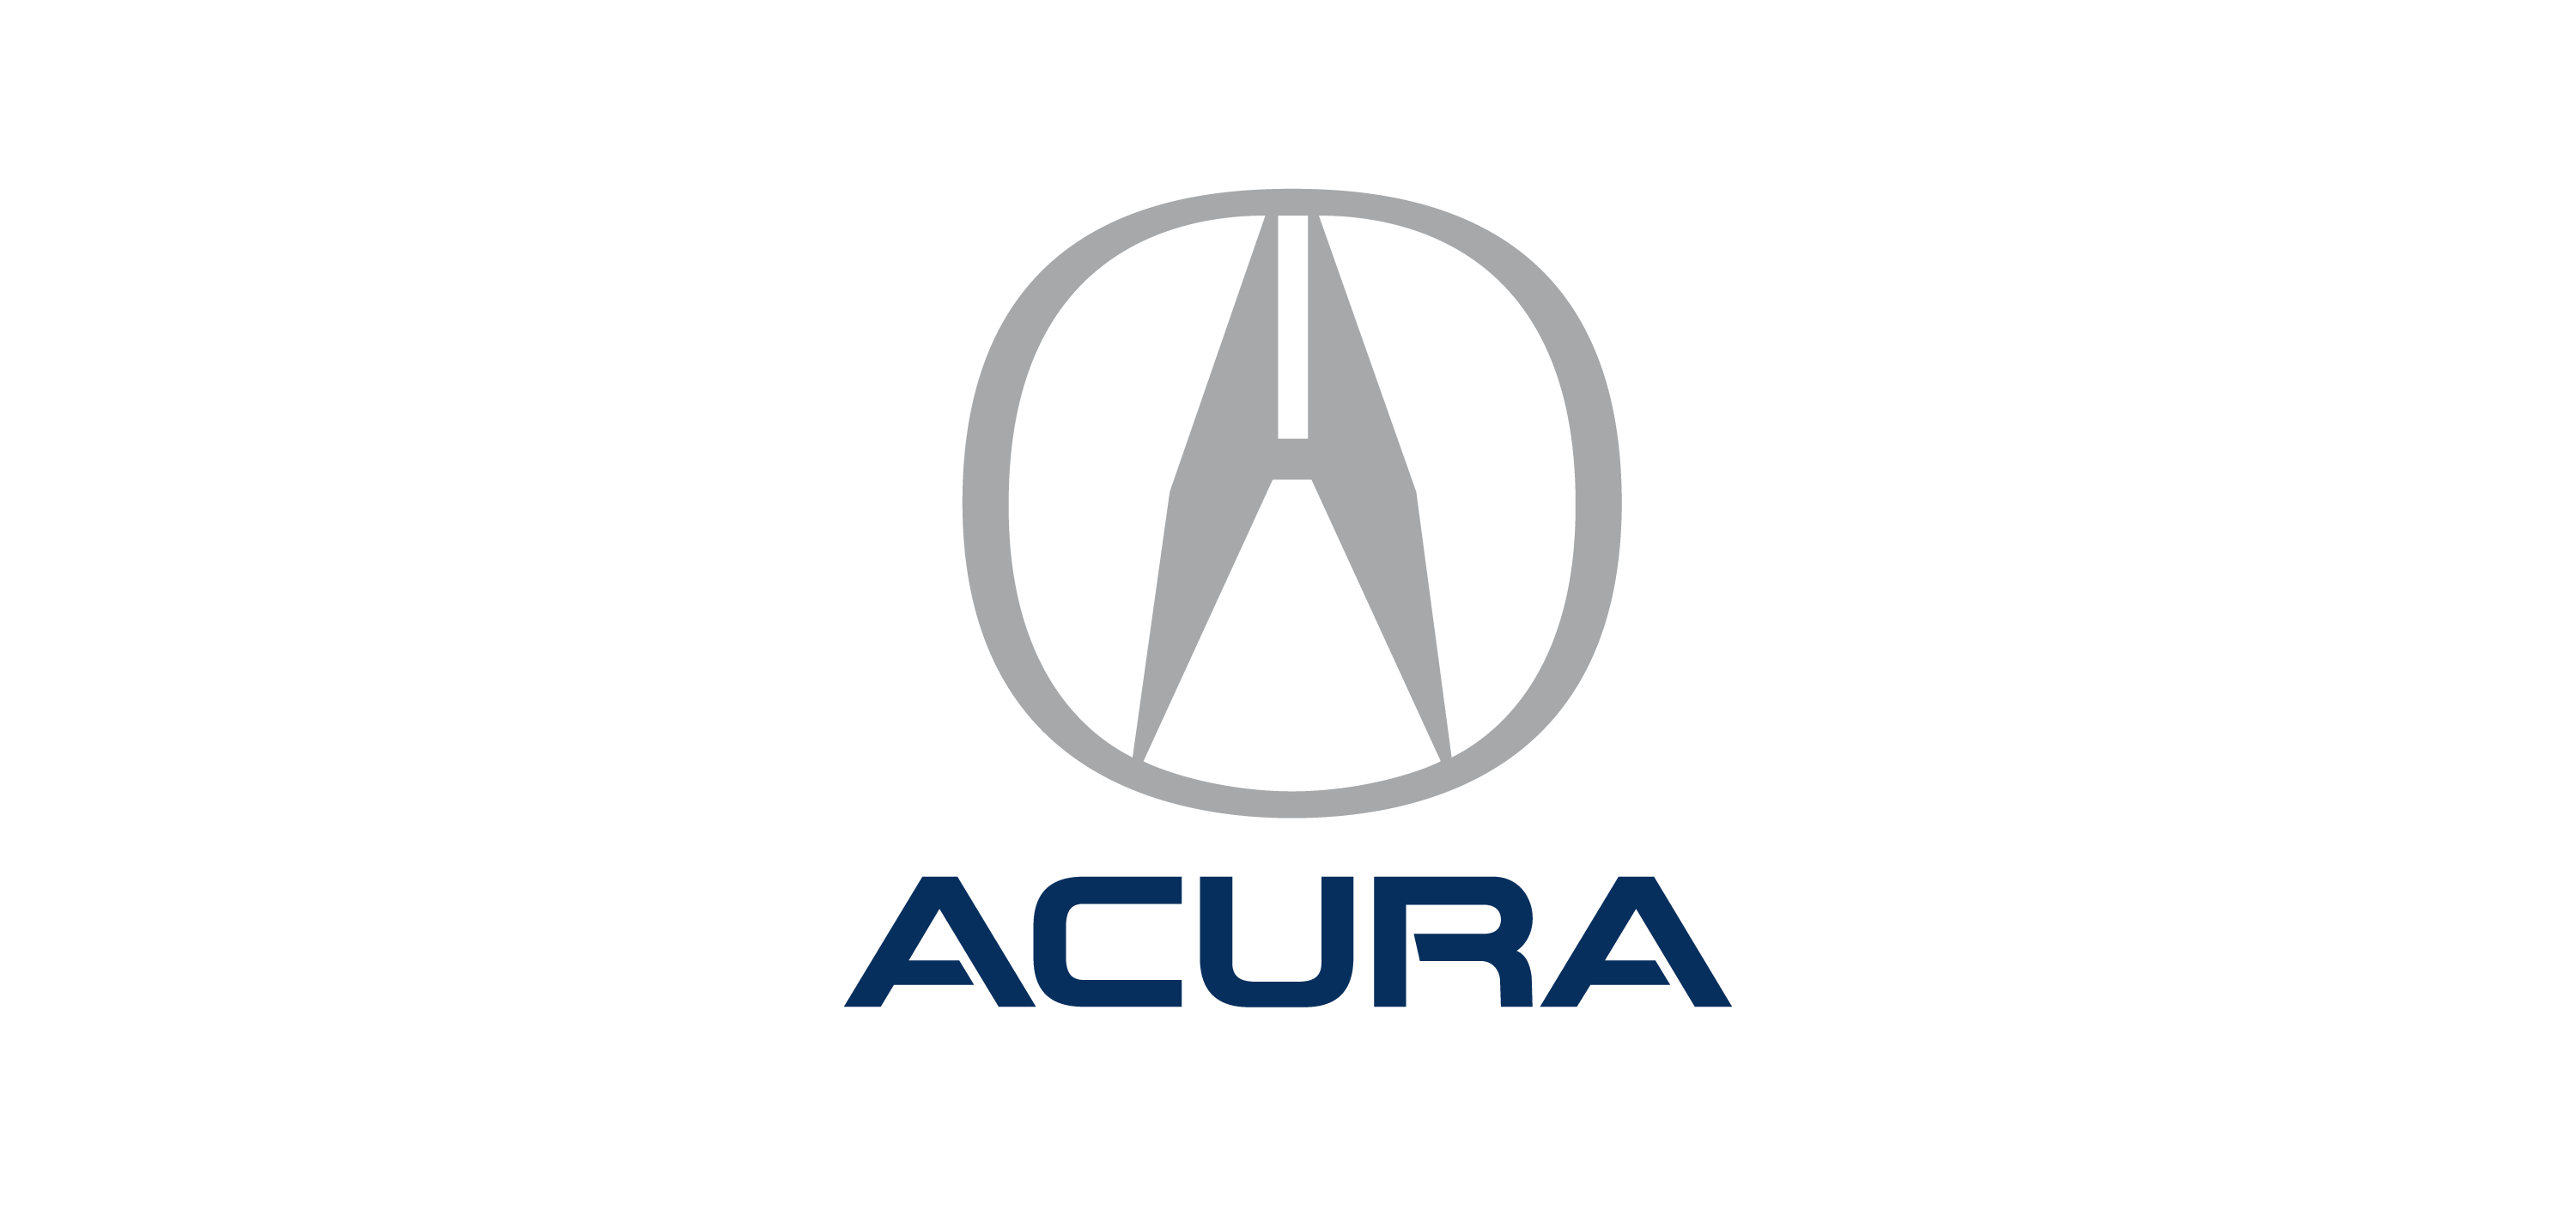 Acura Precision Crafted Performance